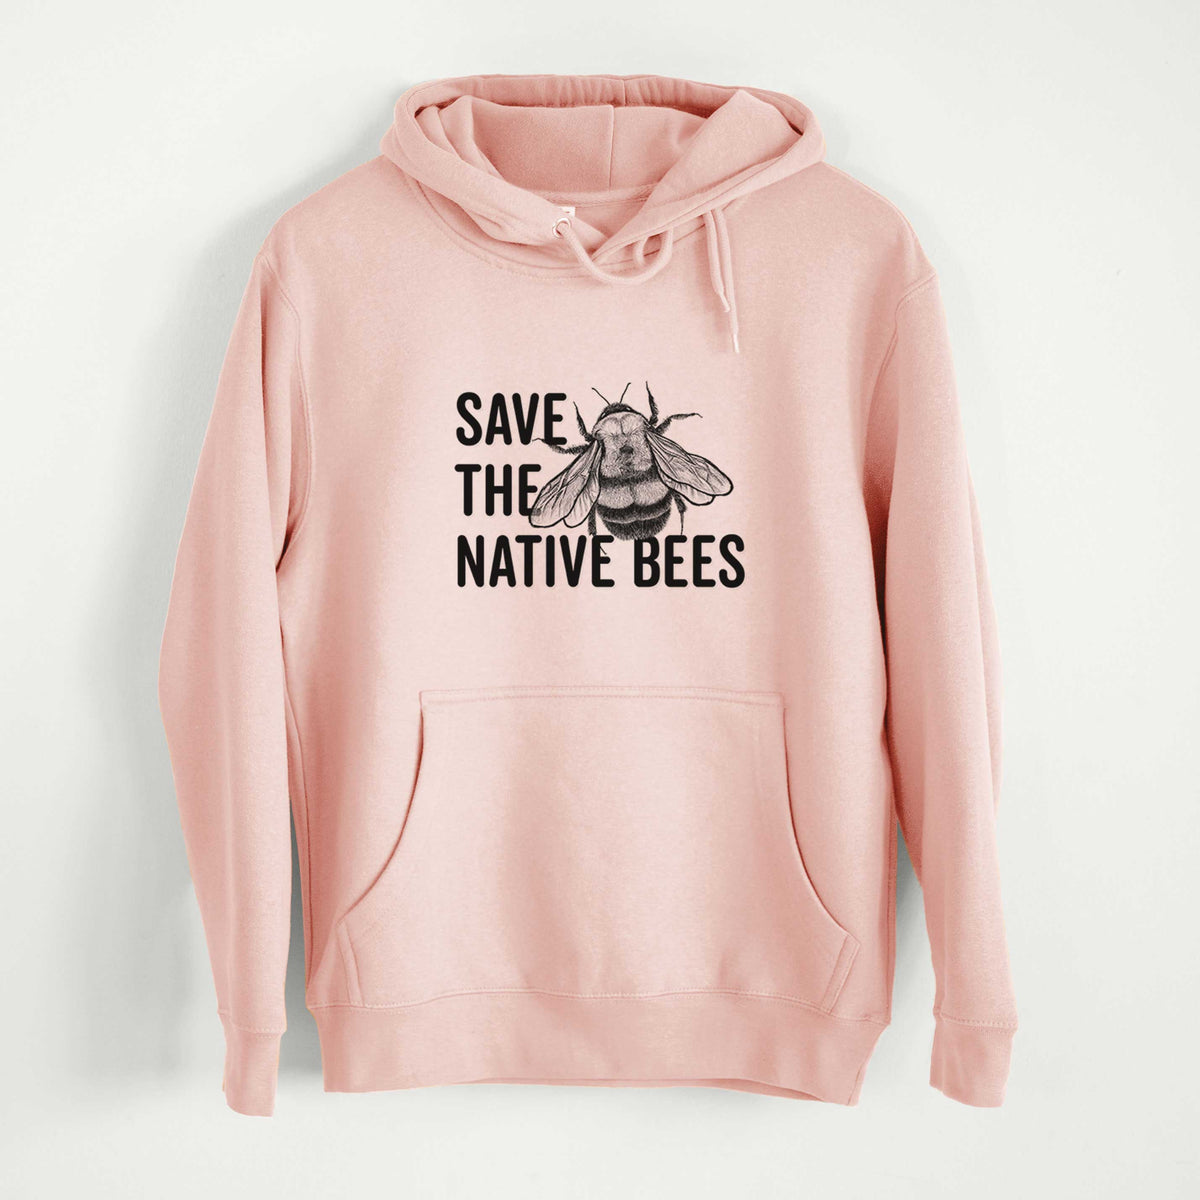 Save the Native Bees  - Mid-Weight Unisex Premium Blend Hoodie